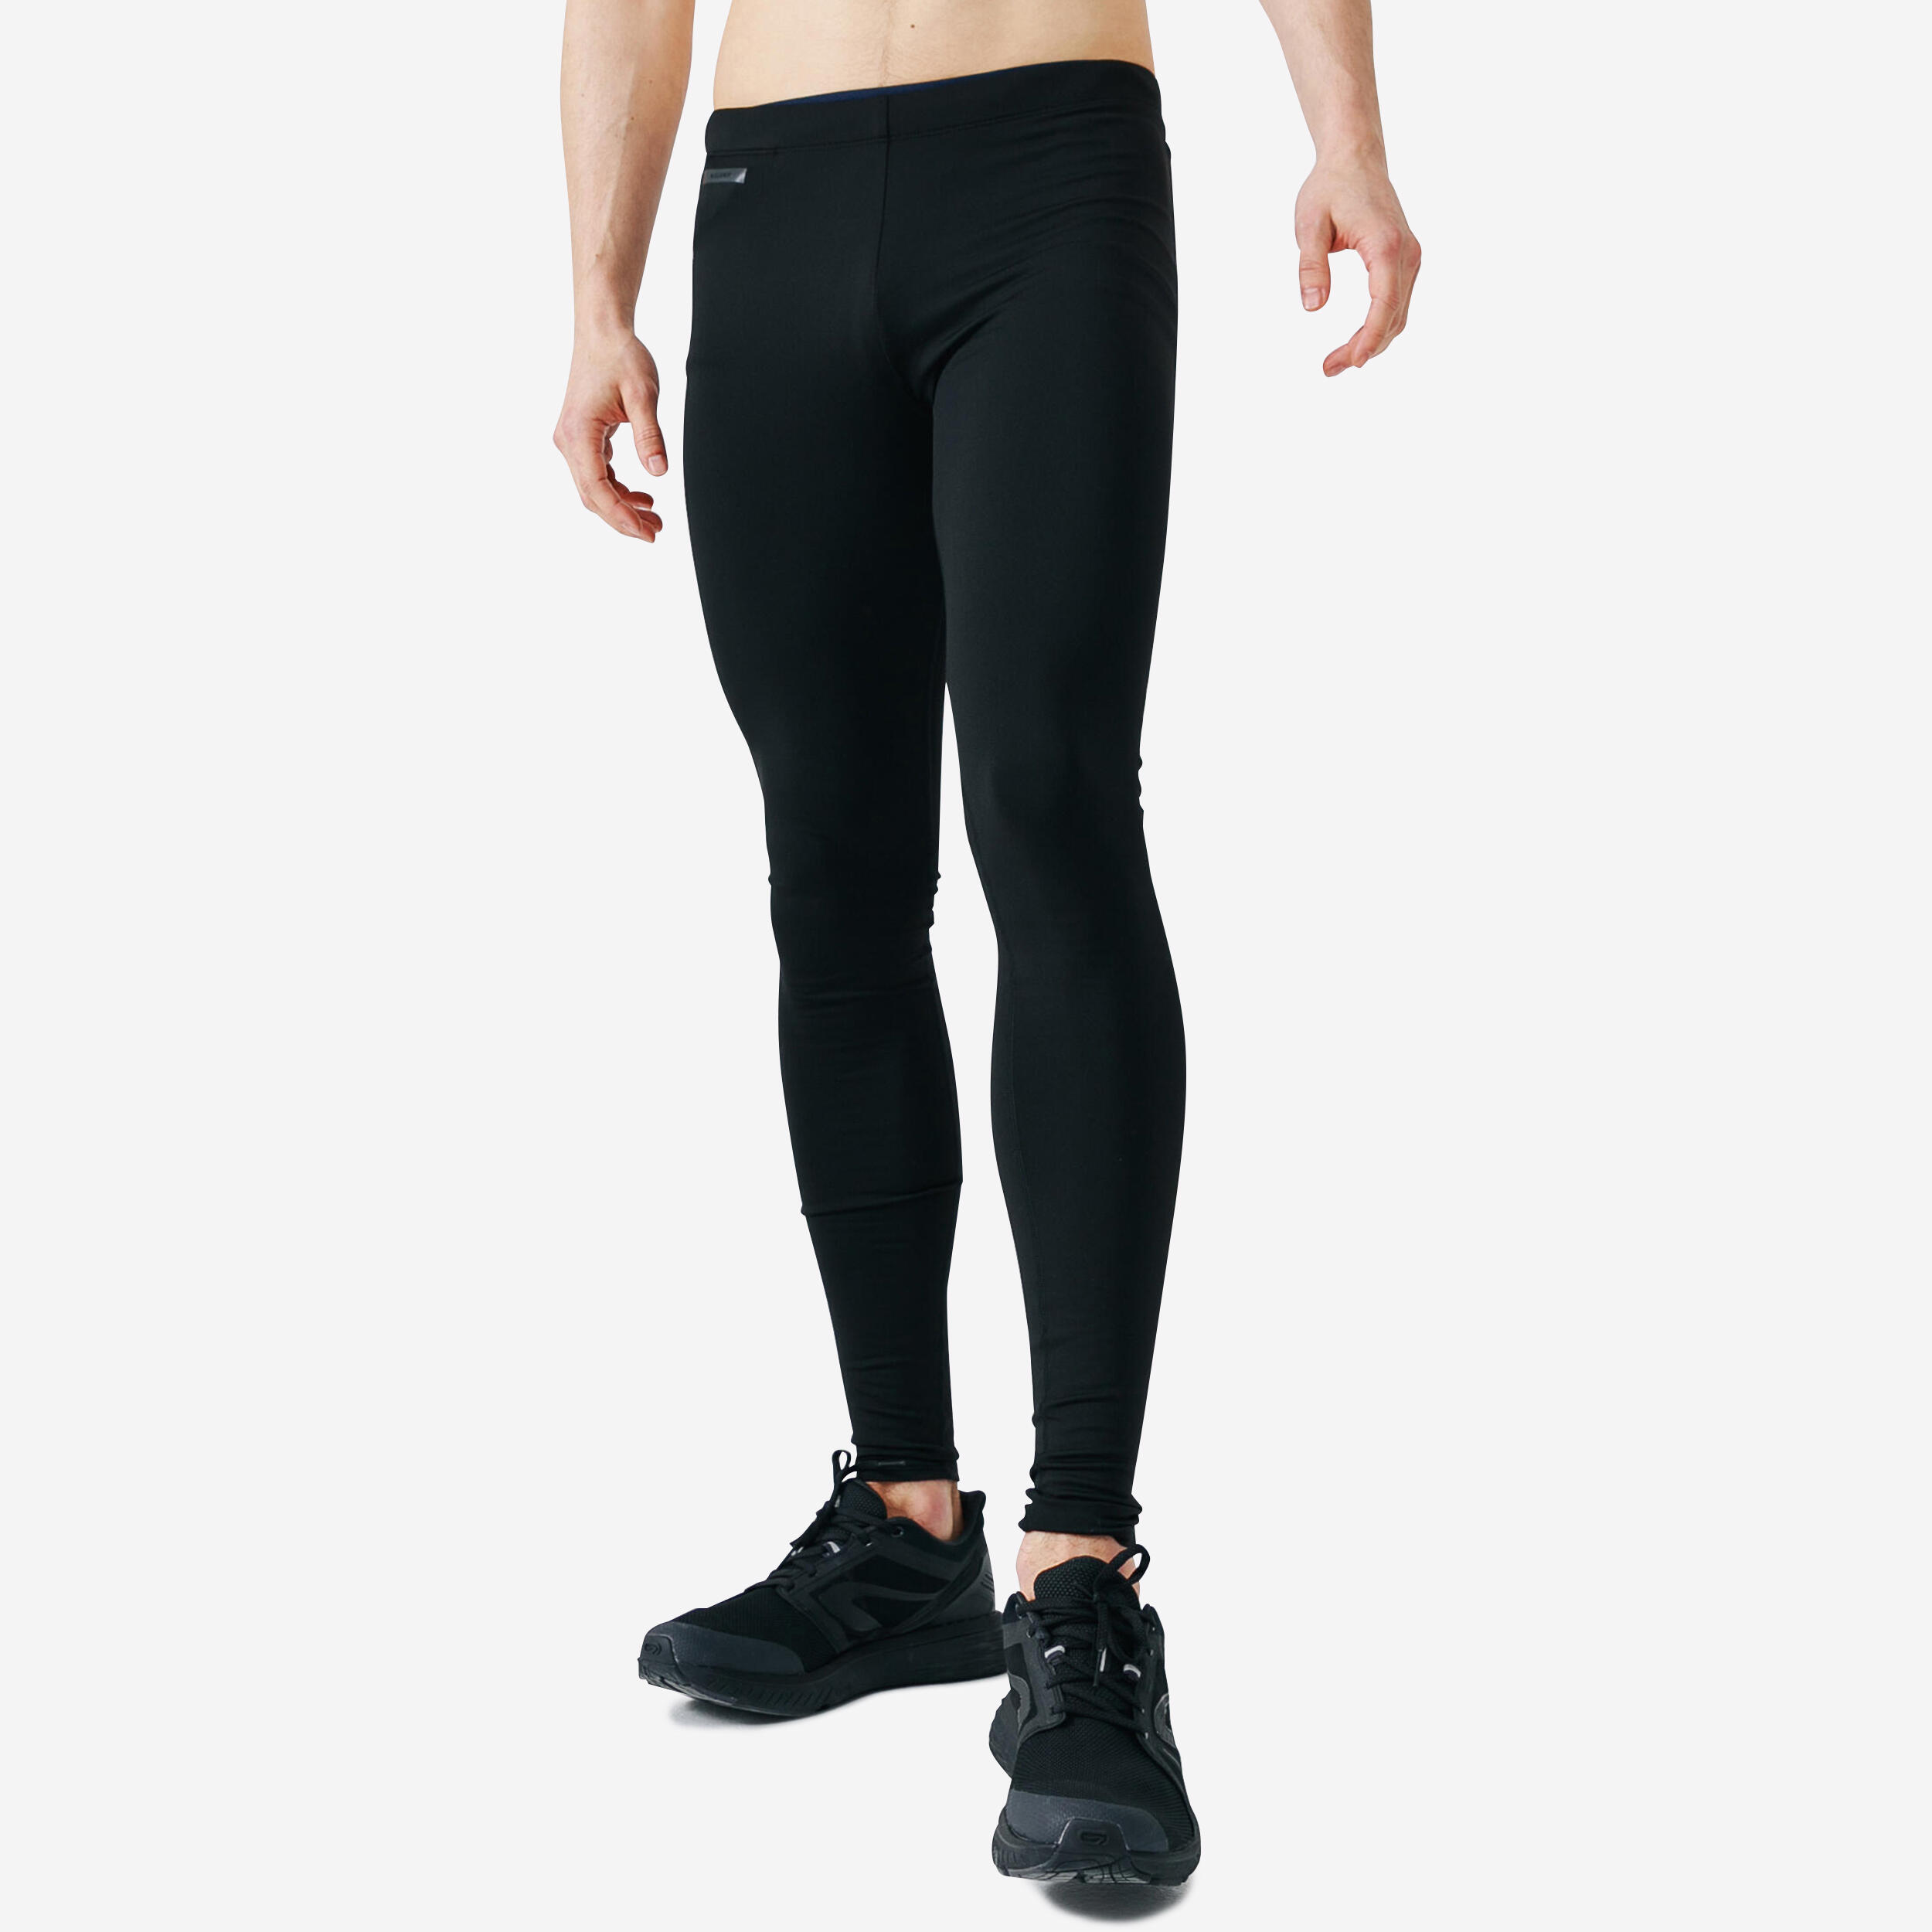 Review of Decathlon Running Apparel or Why Running Tights Should Not Cost  $158 – runningtotravel